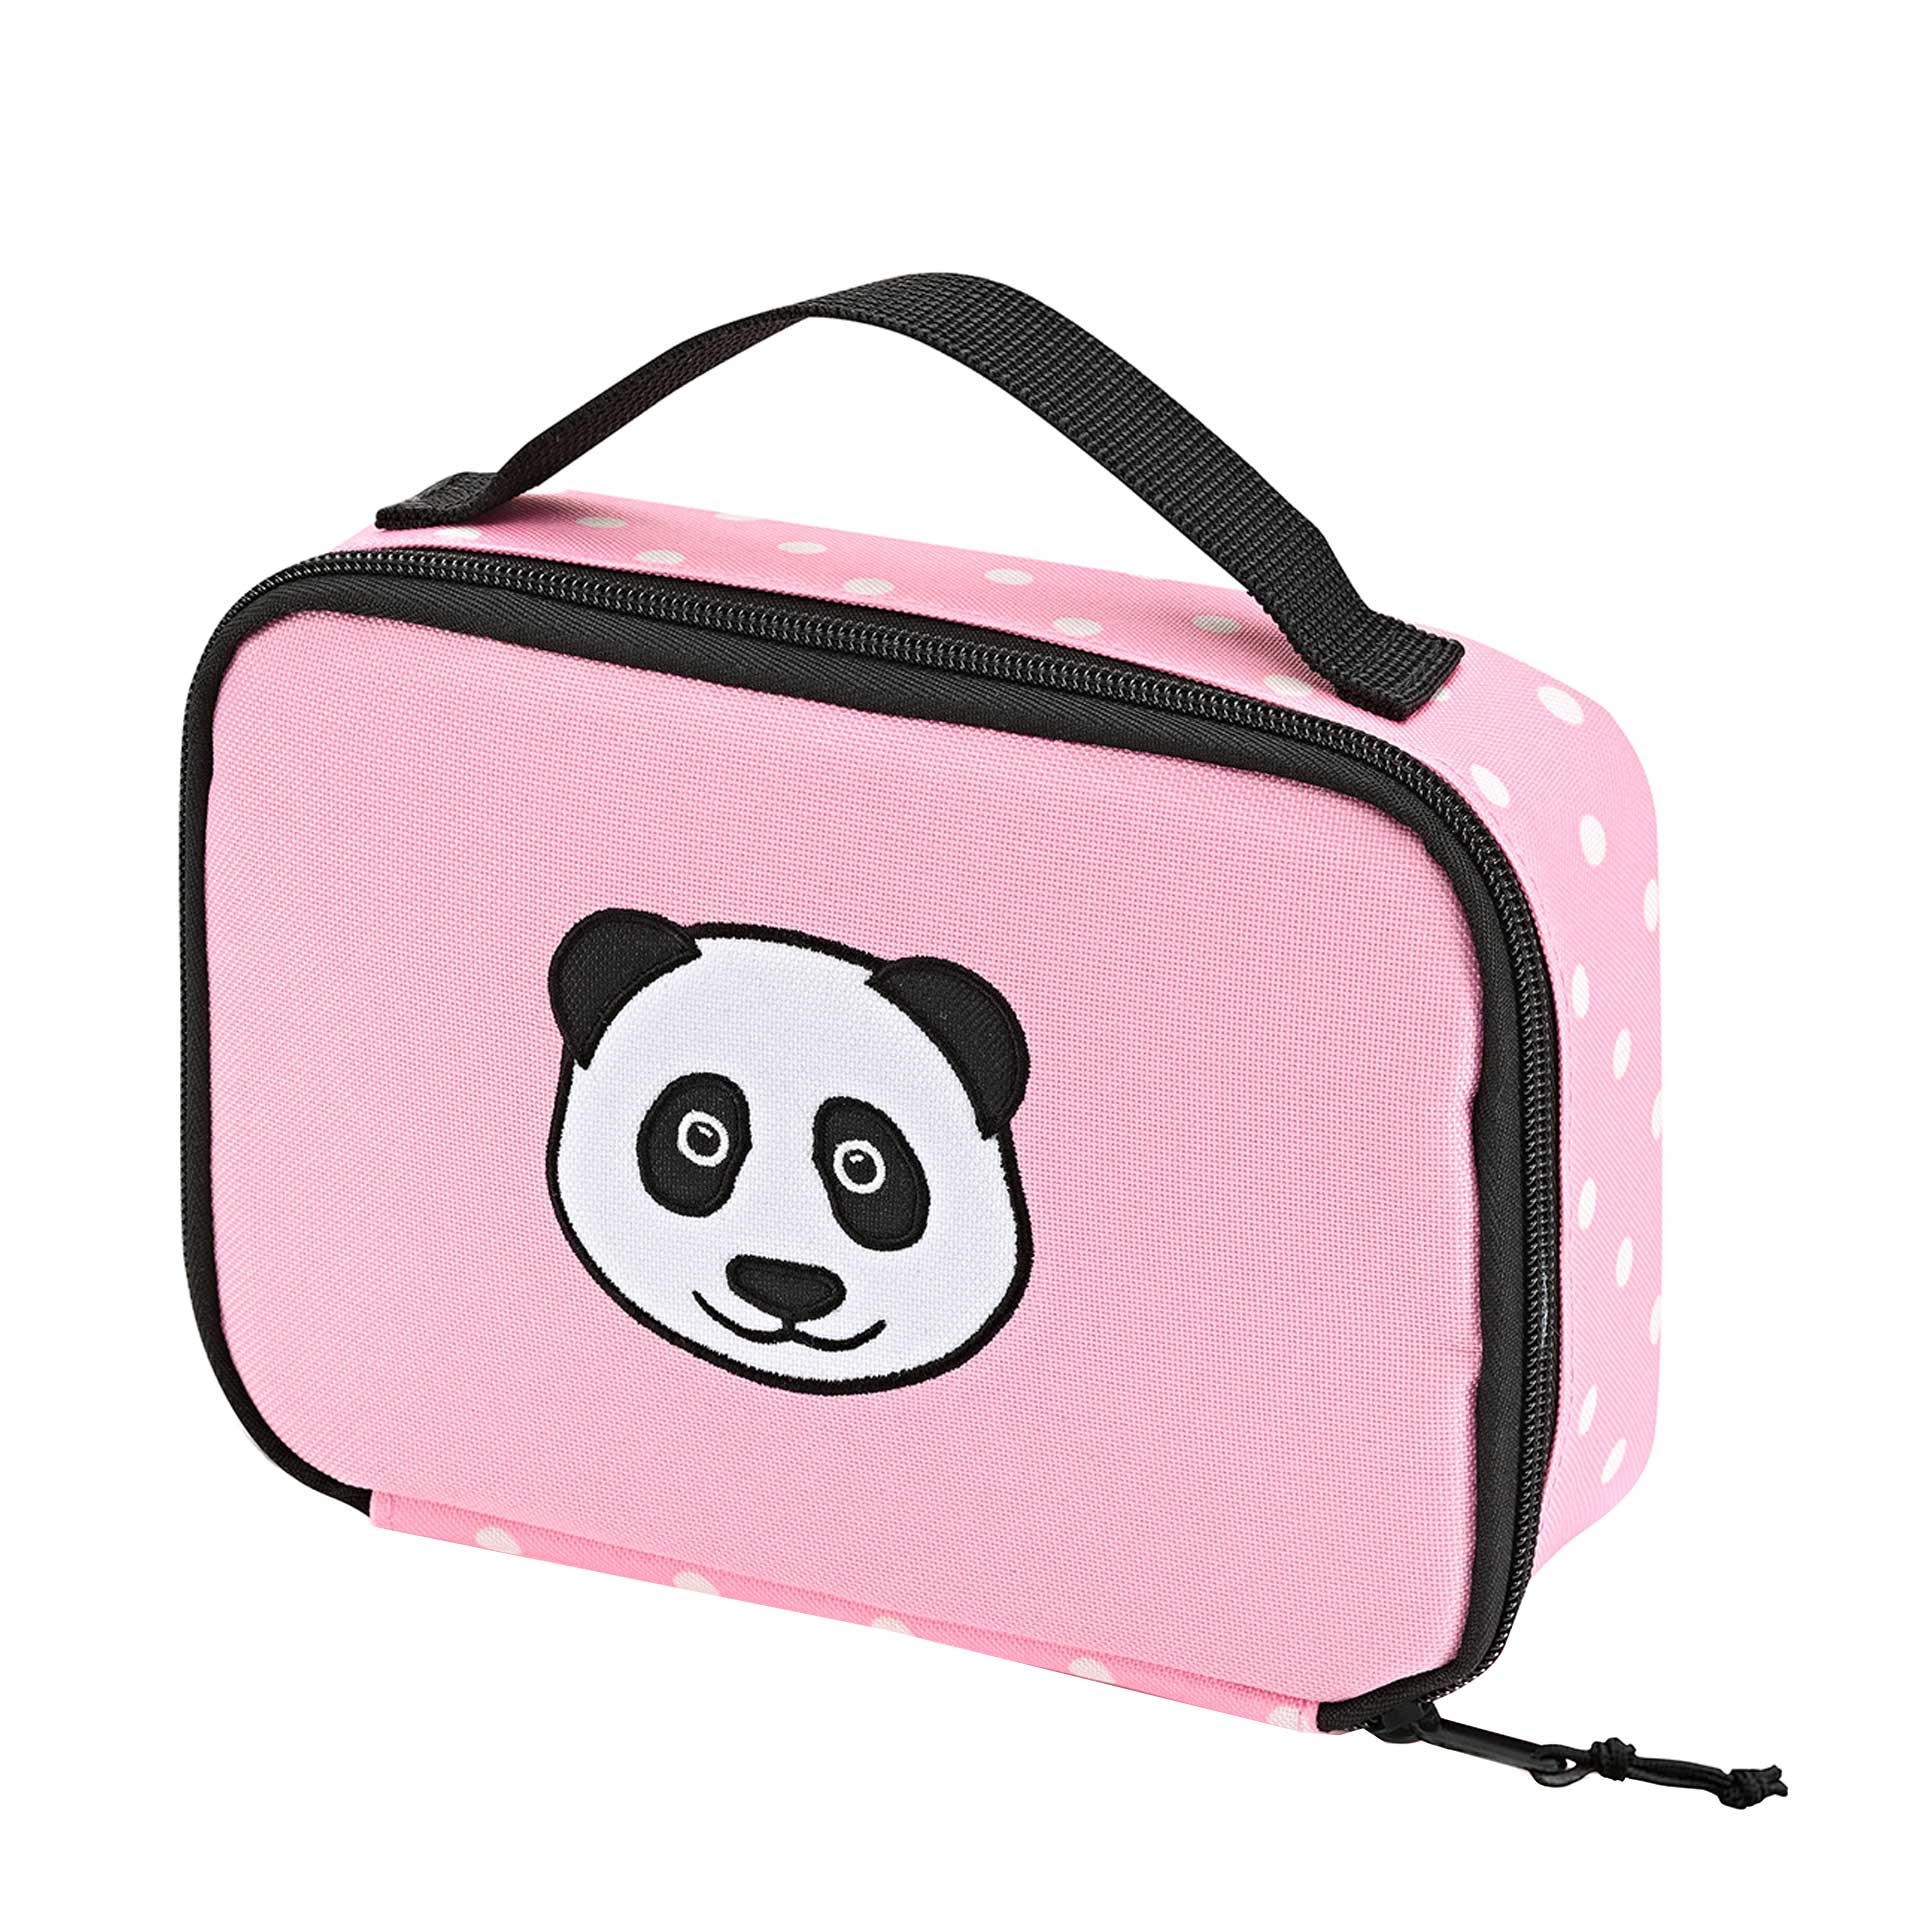 reisenthel Thermocase Kids isolierte Lunchboxhülle panda dots pink